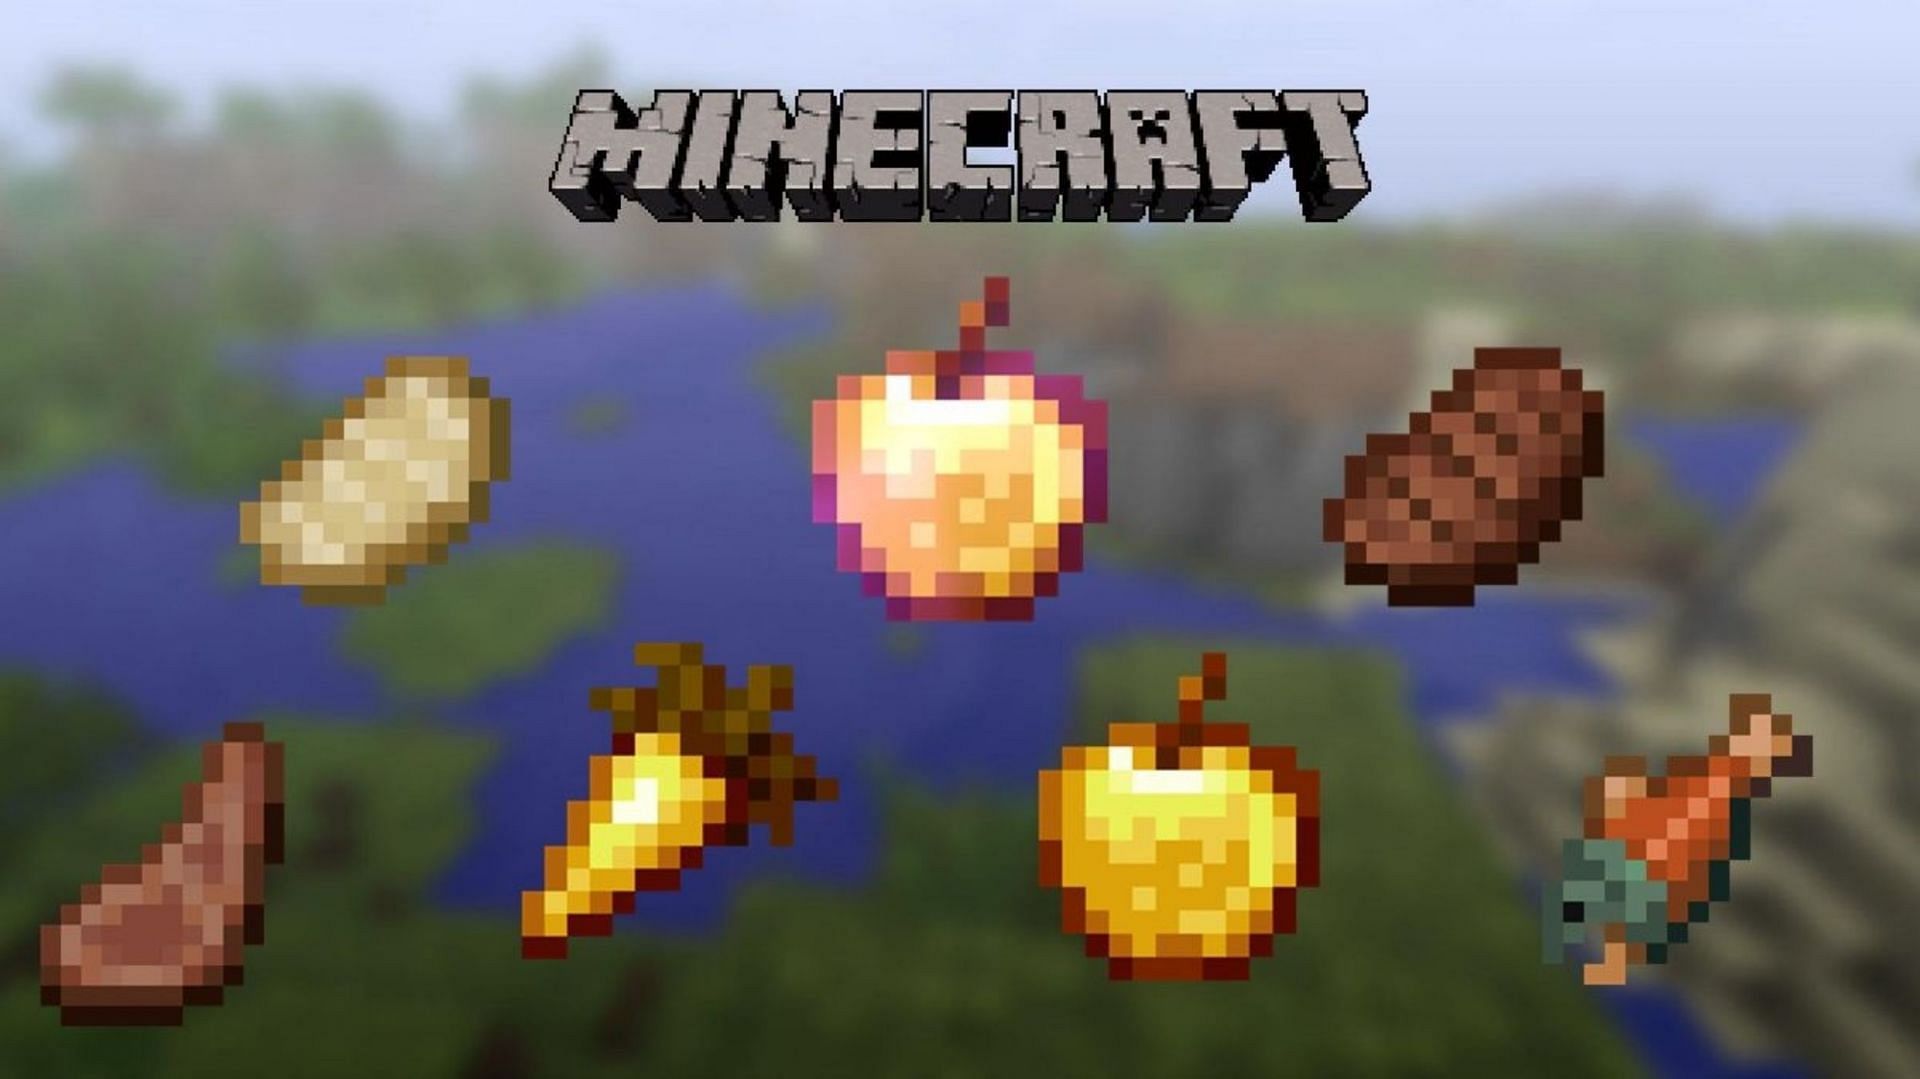 Different foods offer varied sustenance values in Minecraft (Image via Mojang)